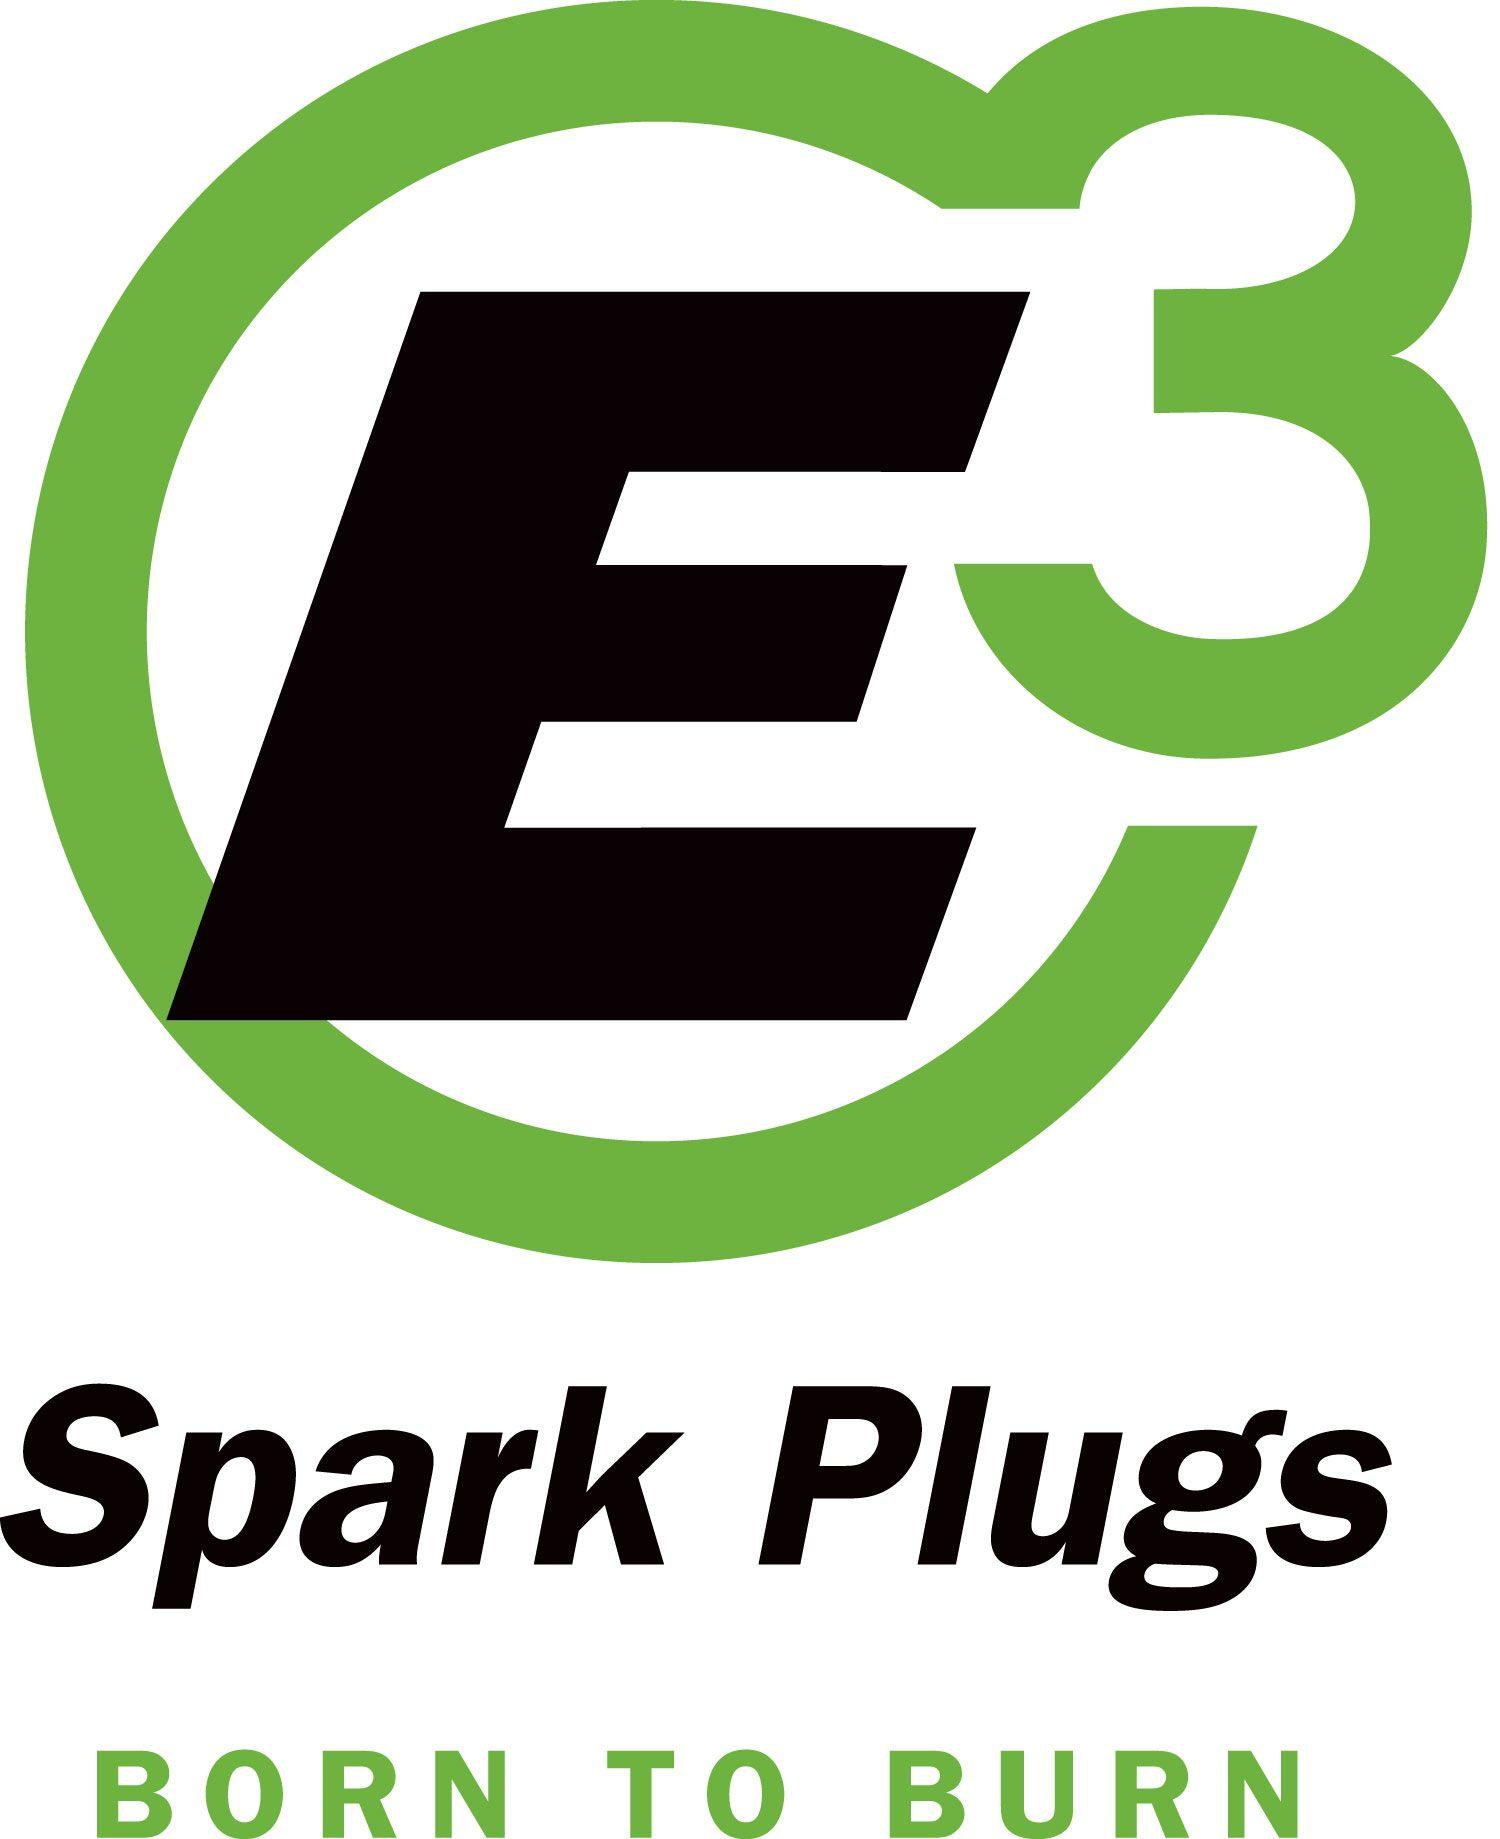 E3 Spark Plugs Logo - E3 Spark Plugs Partners With Midwest Truck Series In 2017. Midwest